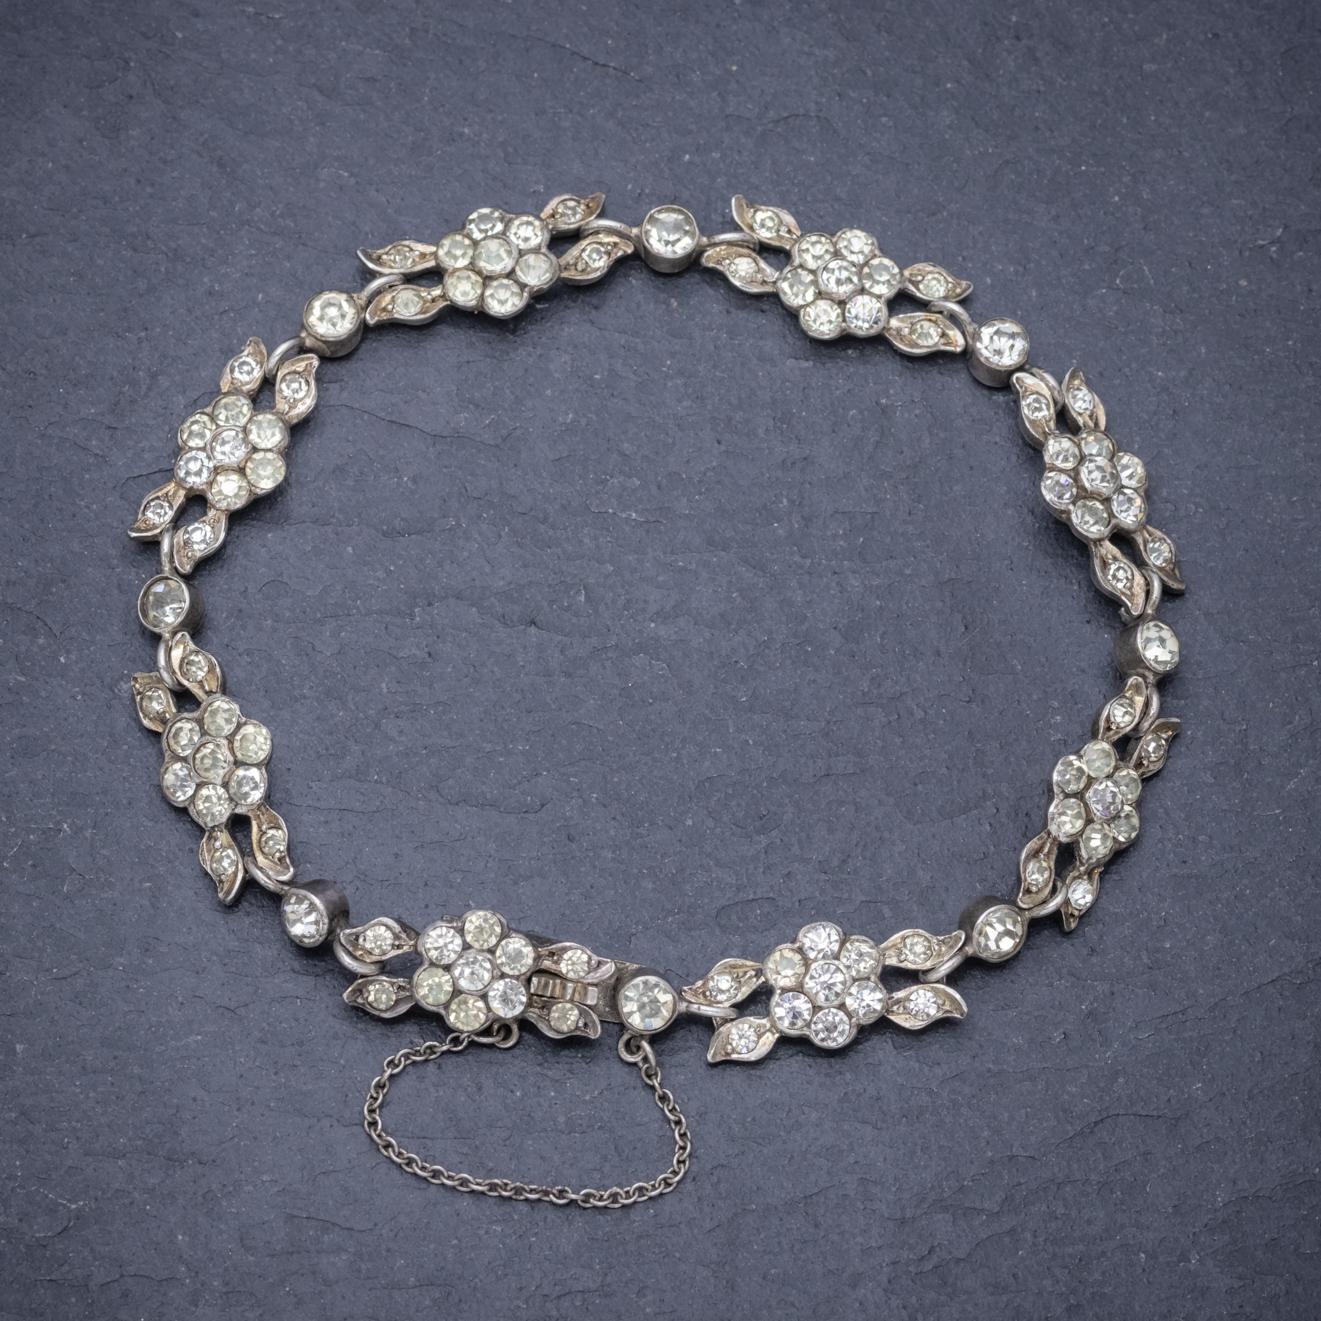 A stunning antique French bracelet from the early 20th century made up of lovely floral links decorated with clear Paste Stones that simulate the beauty and sparkle of Diamonds. 

The piece is modelled in strong Silver and fitted with a box clasp